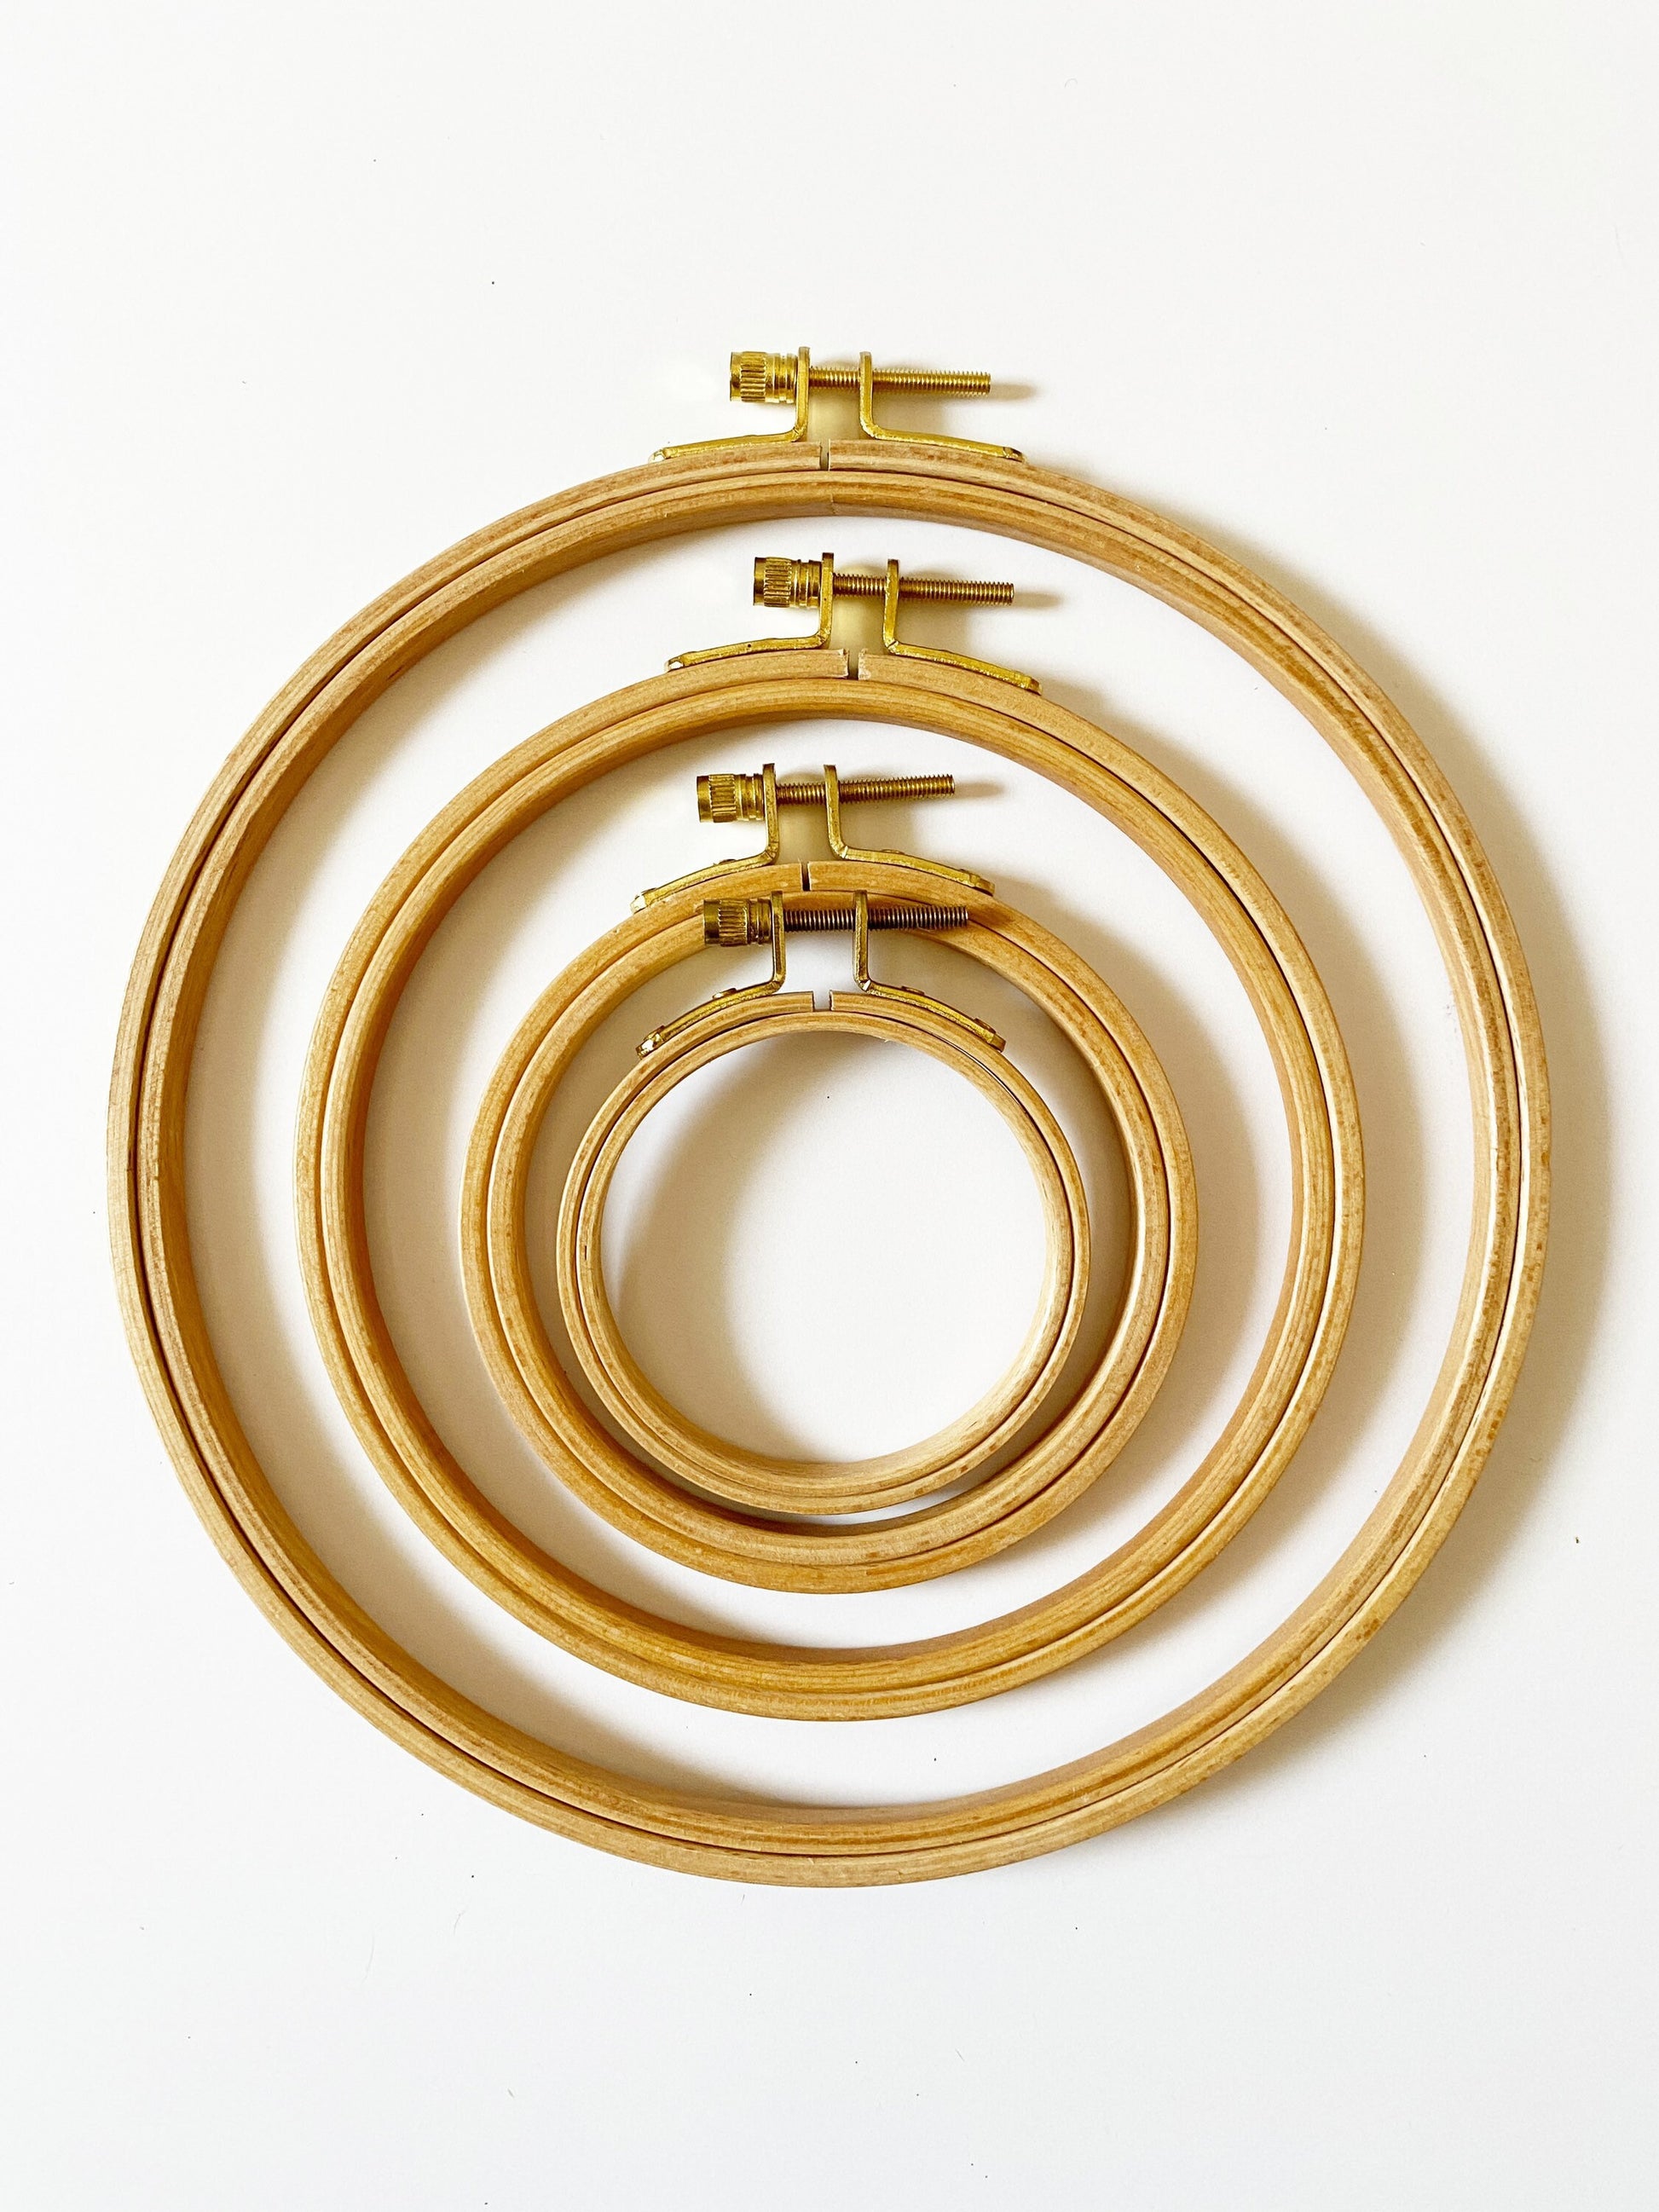 Embroidery Hoops, Hoops, Beechwood Embroidery Hoops - Wooden Embroidery  Hoops, Hand Embroidery Hoop with gold hardware — Handstitched Studio